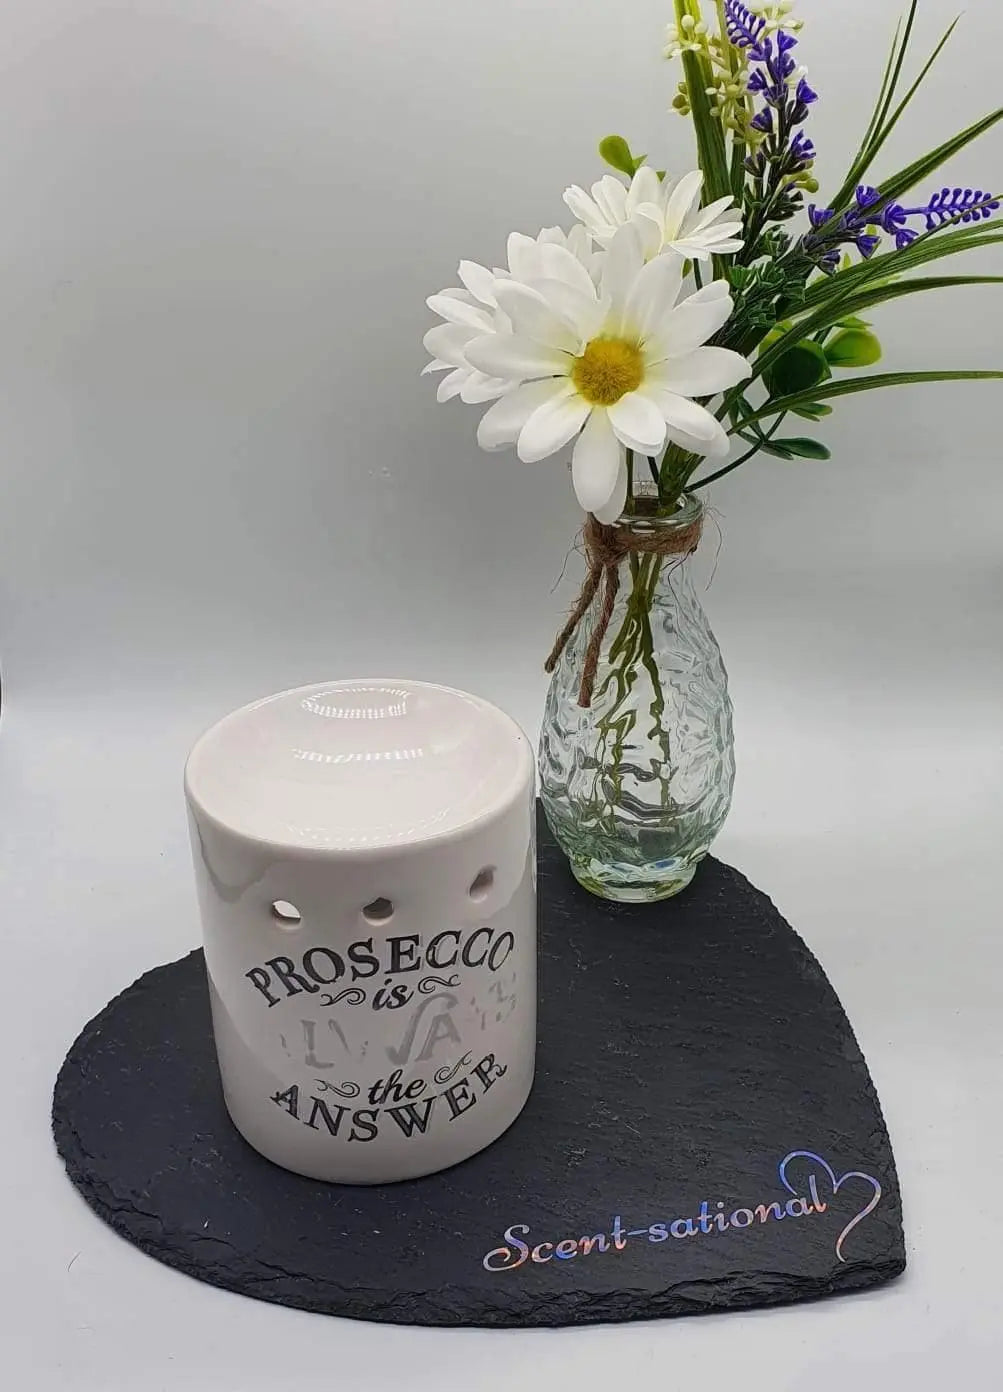 White Ceramic Wax Melt Burner With Prosecco Logo Scent Sational Wax melts